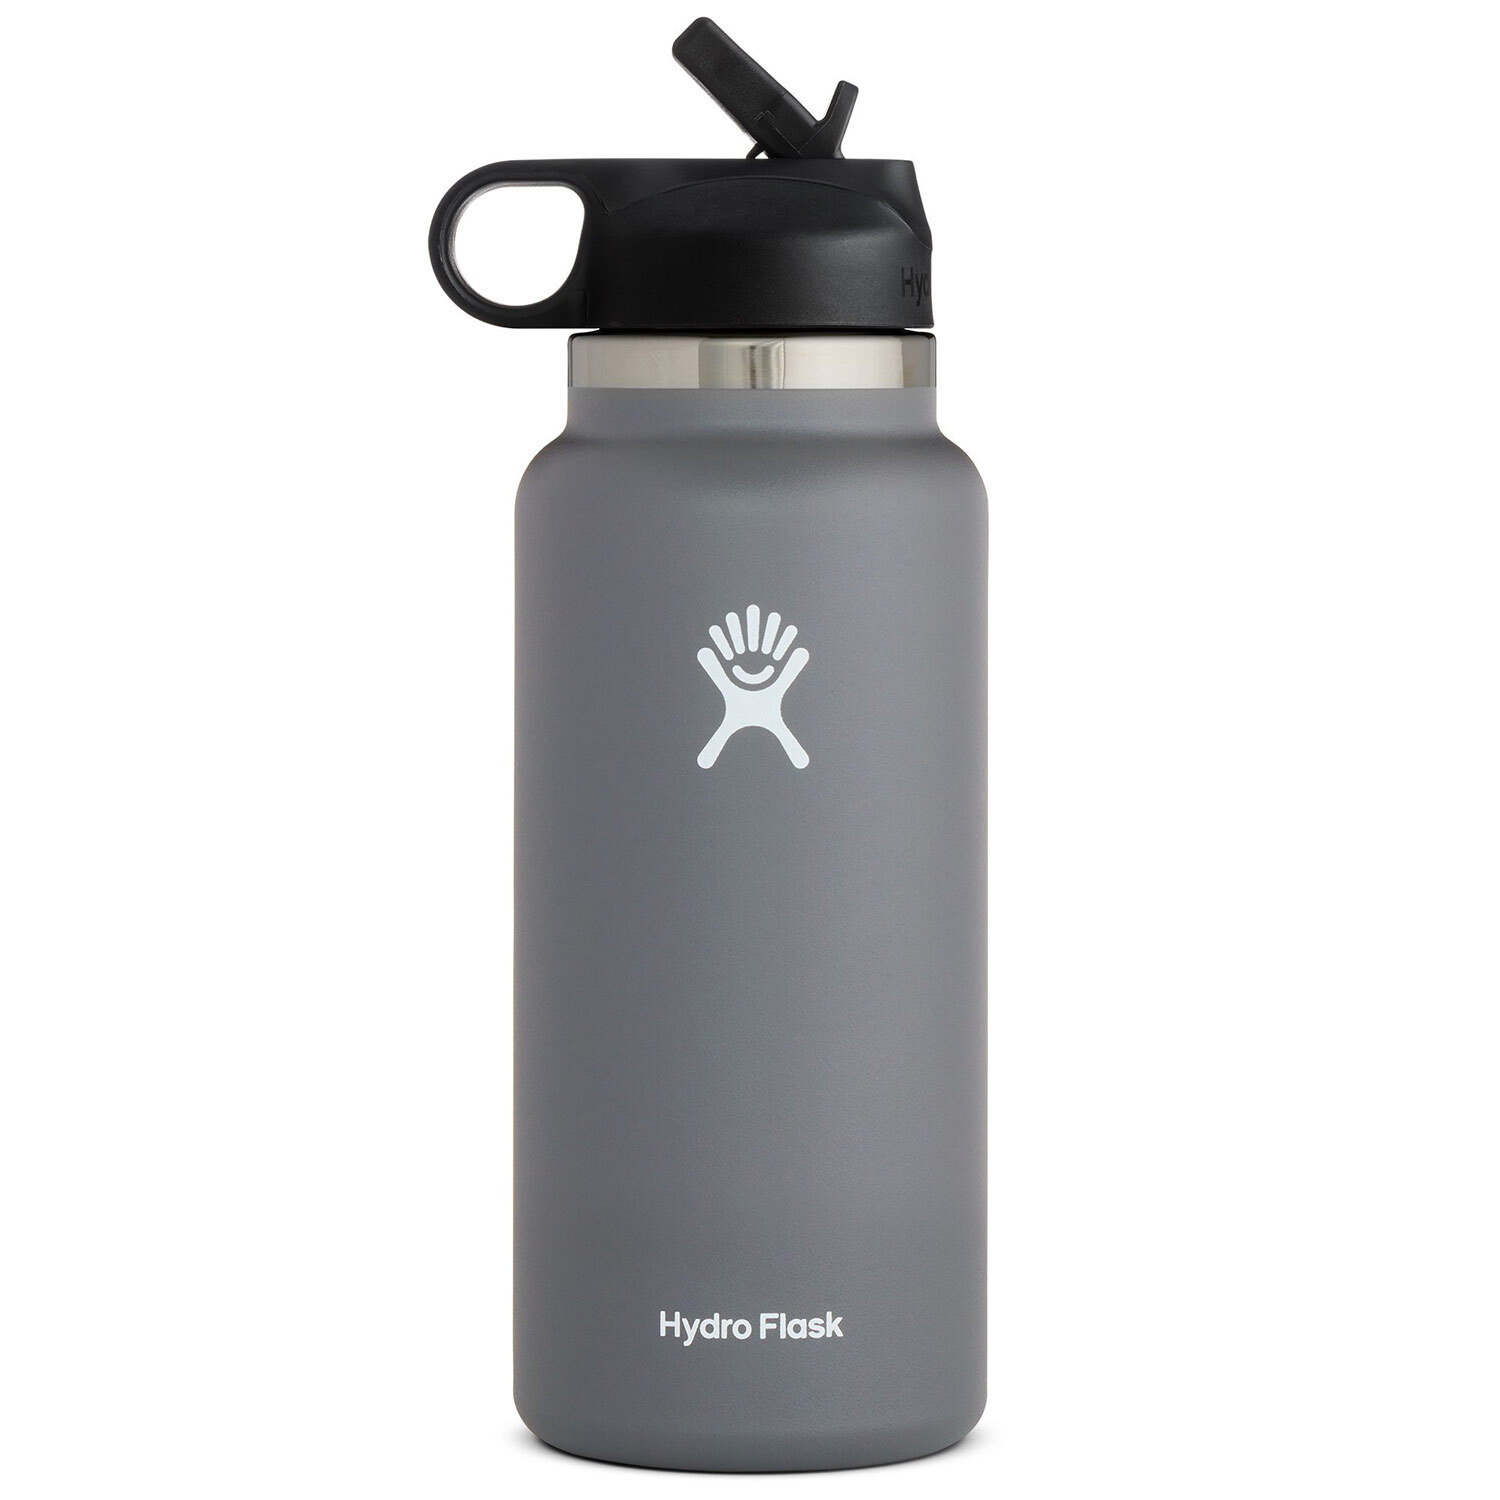 HYDRO FLASK 32 oz. Wide-Mouth Water Bottle with Straw Lid